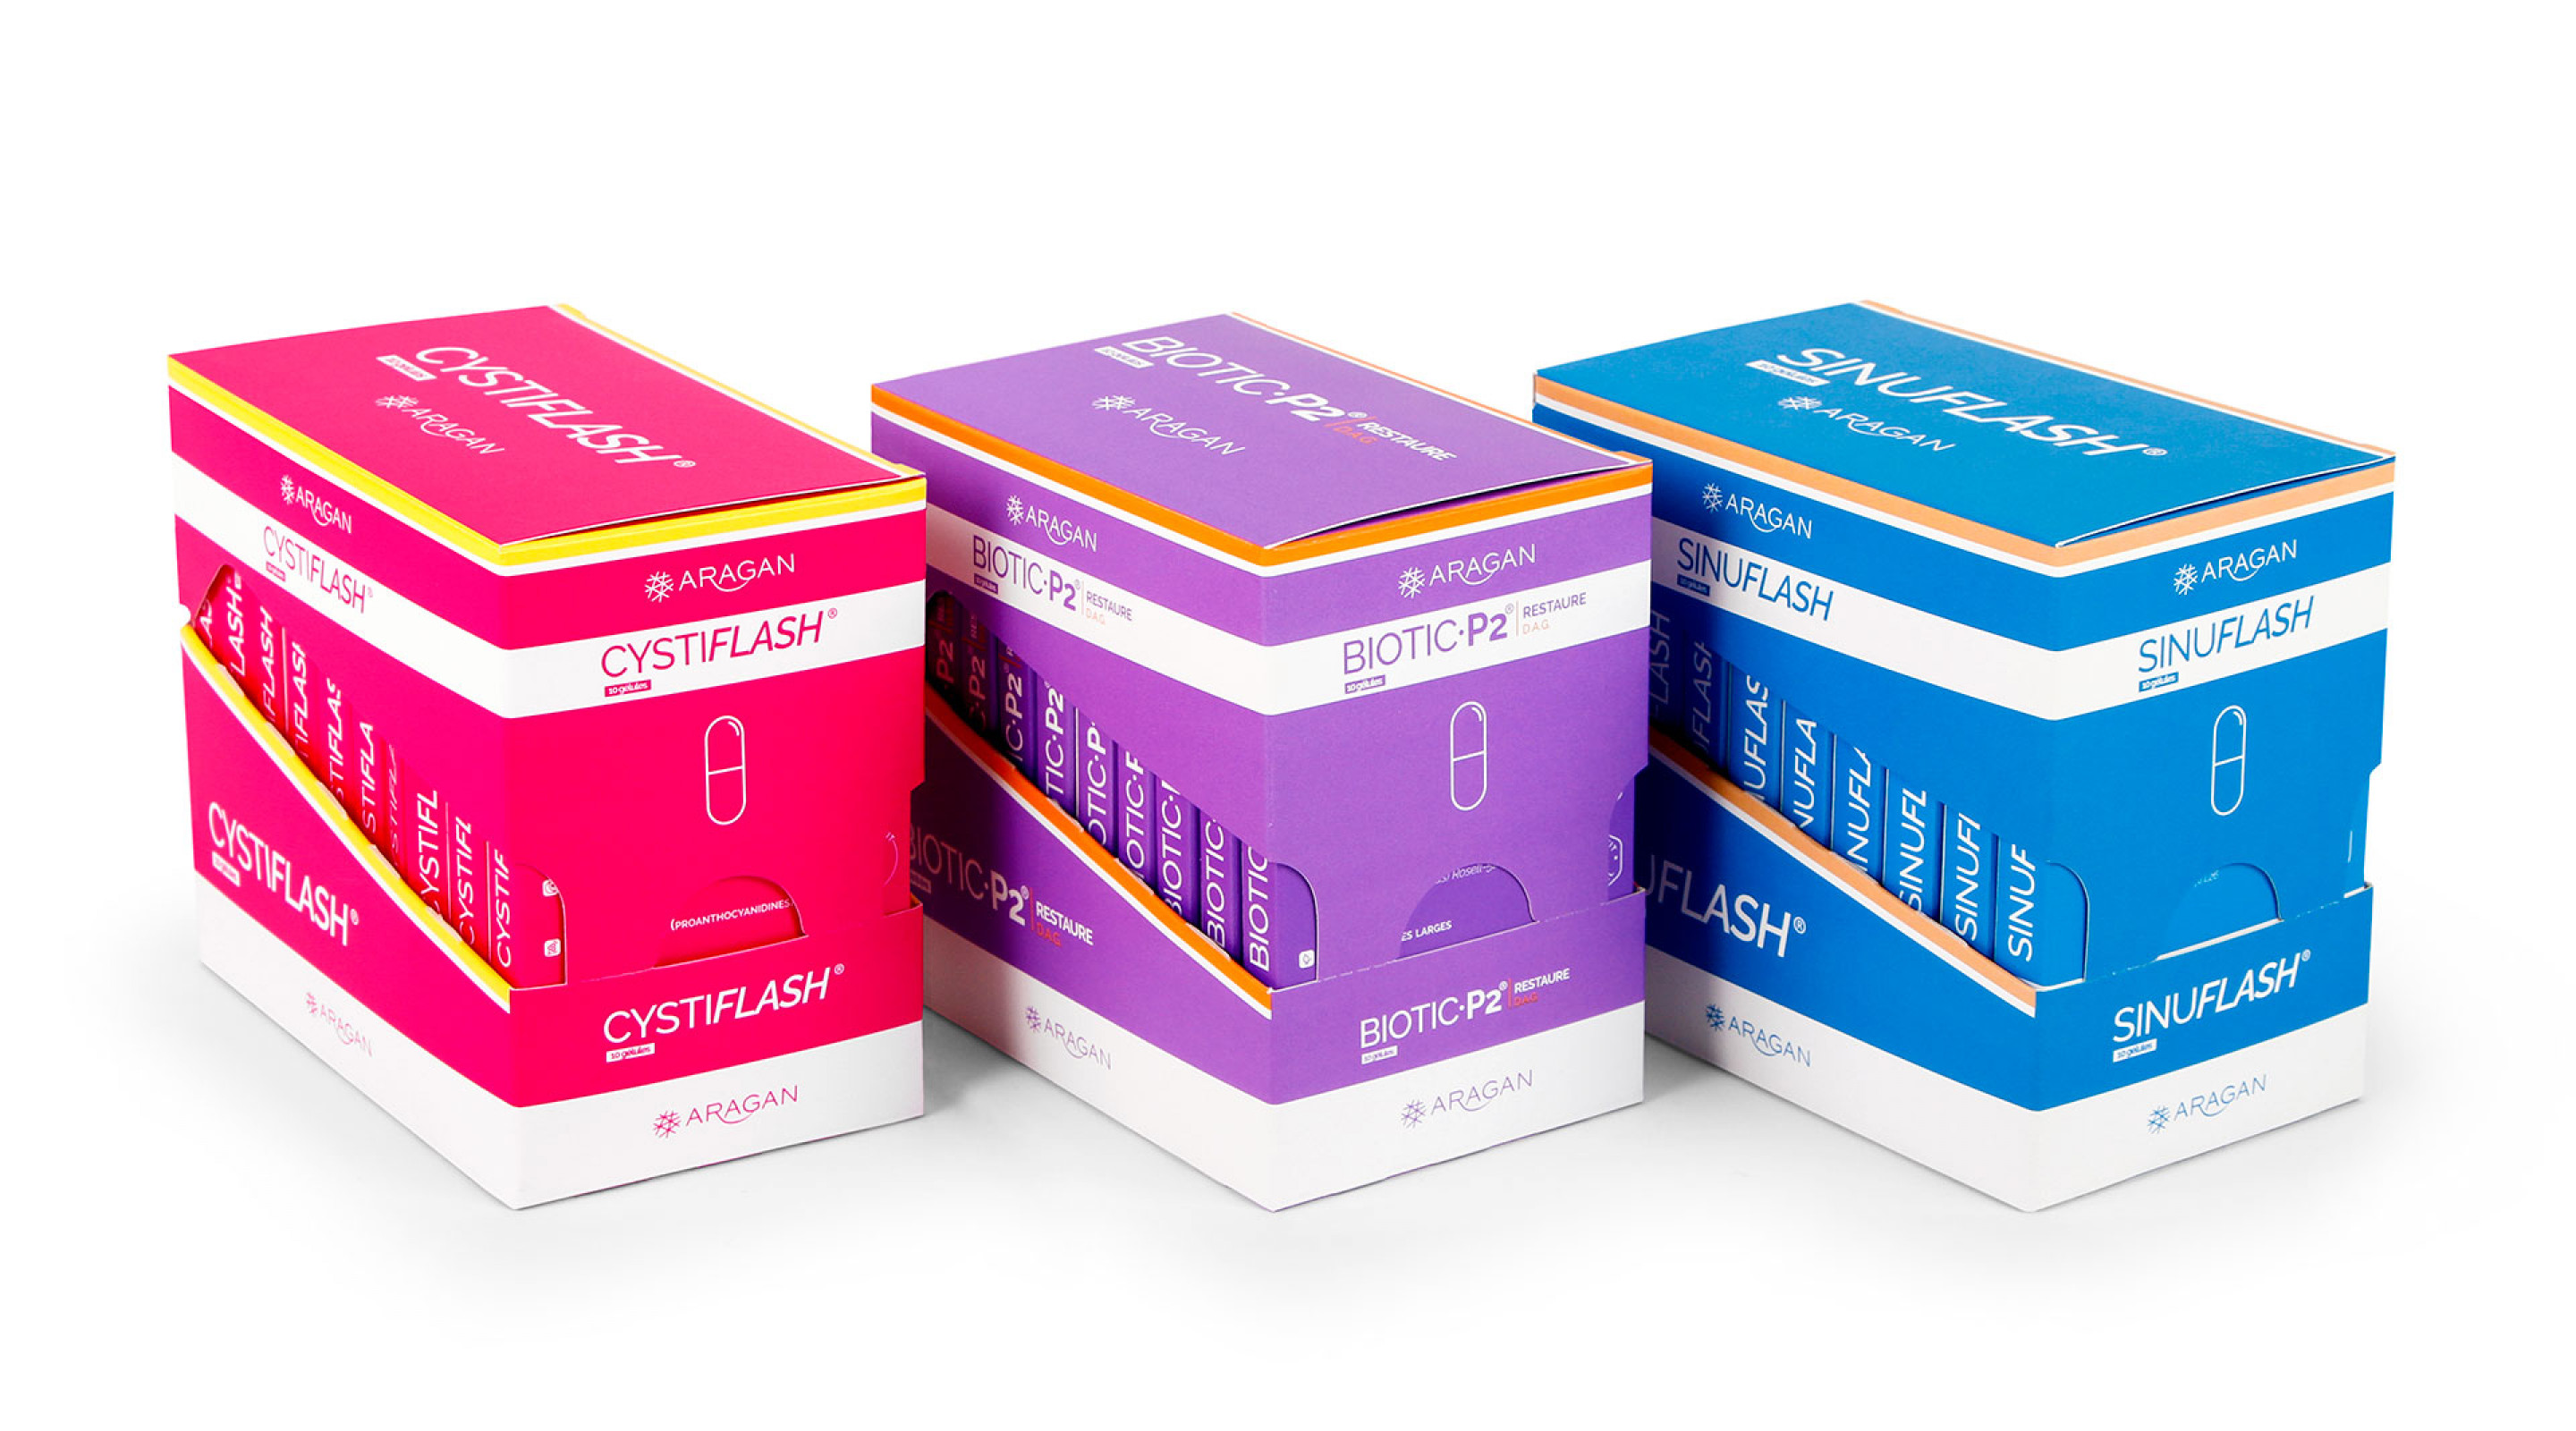 Point of Sale Packaging for Aragan Supplement Blister Packaging